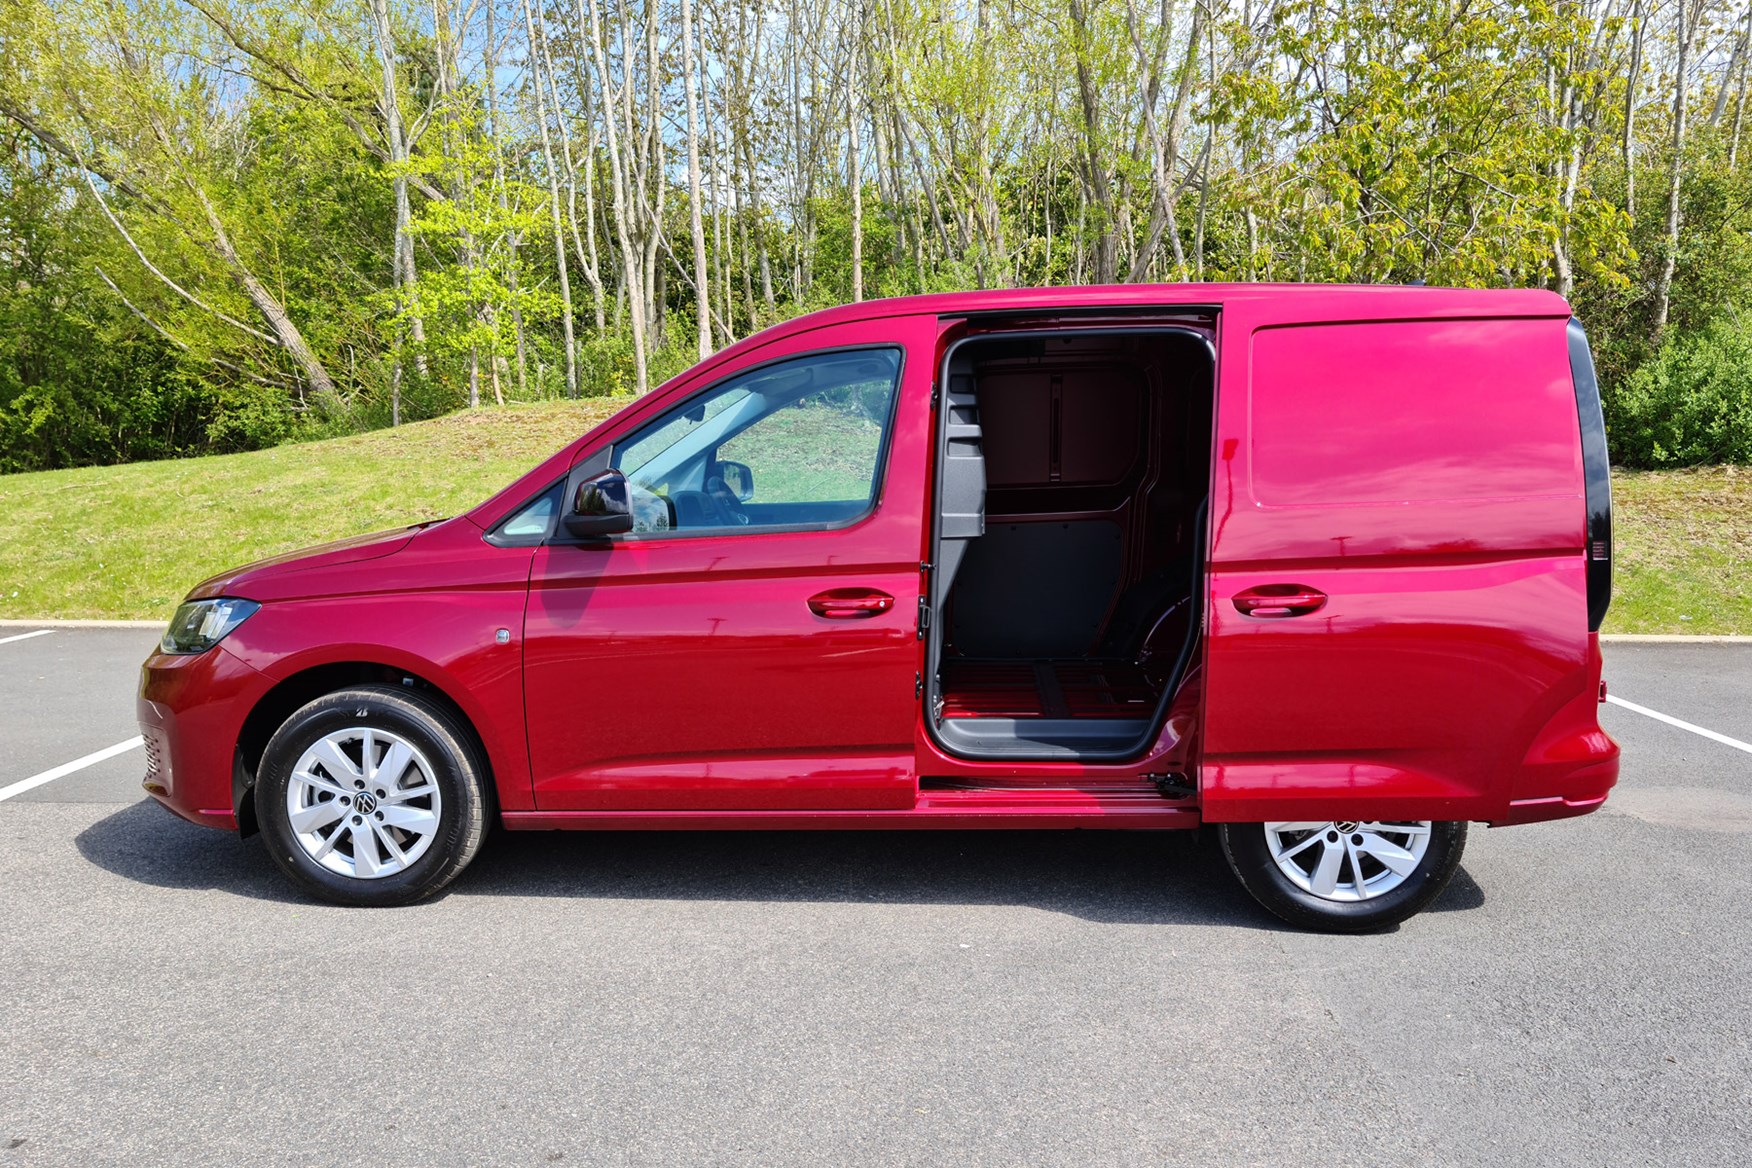 Volkswagen Caddy Cargo 1.5 TSI petrol review - side view, red, with sliding door open